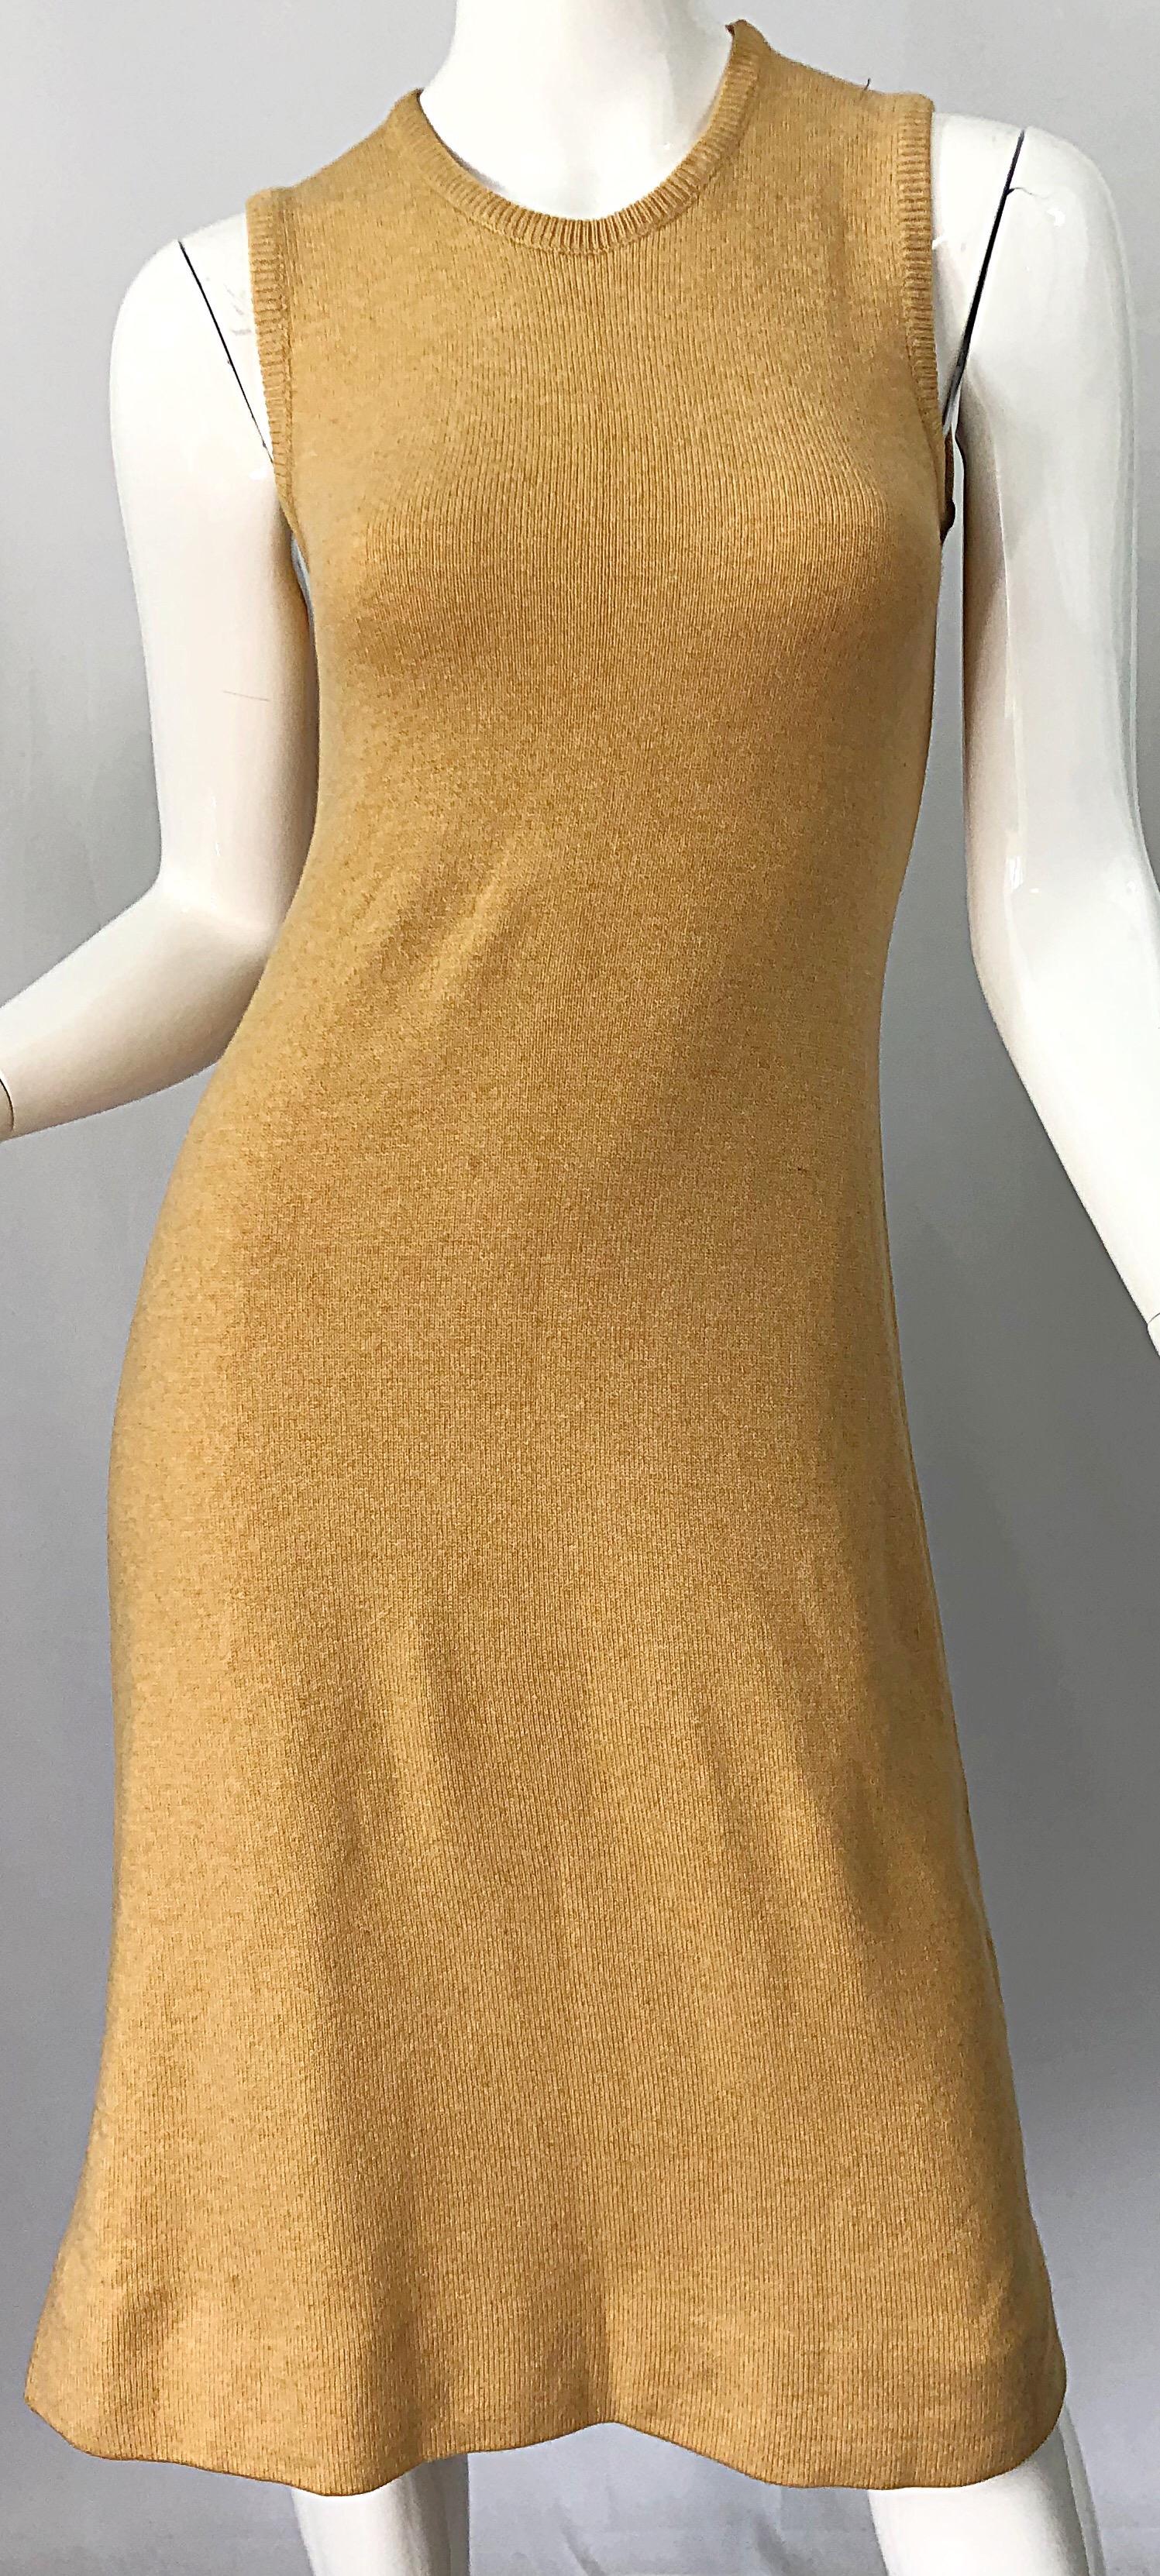 1970s HALSTON Cashmere Camel Tan 70s Vintage Dress and Cardigan Sweater Jacket For Sale 3